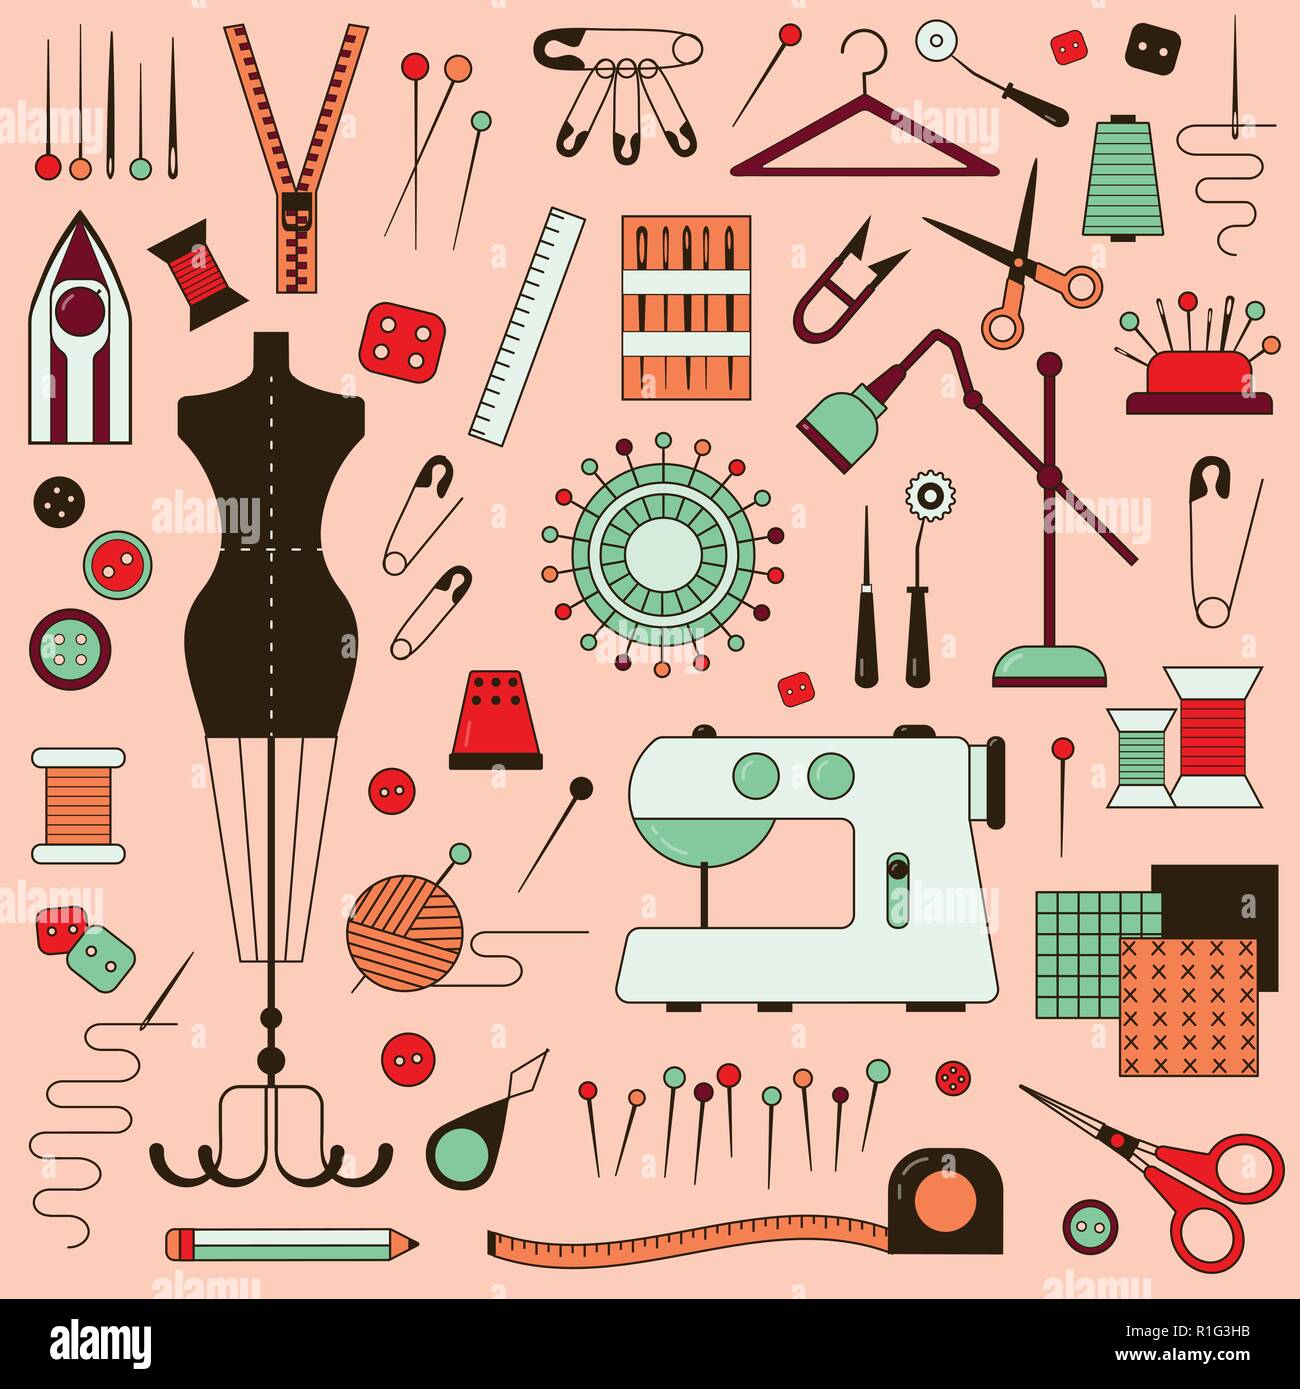 Set sewing tools and materials or elements Vector Image